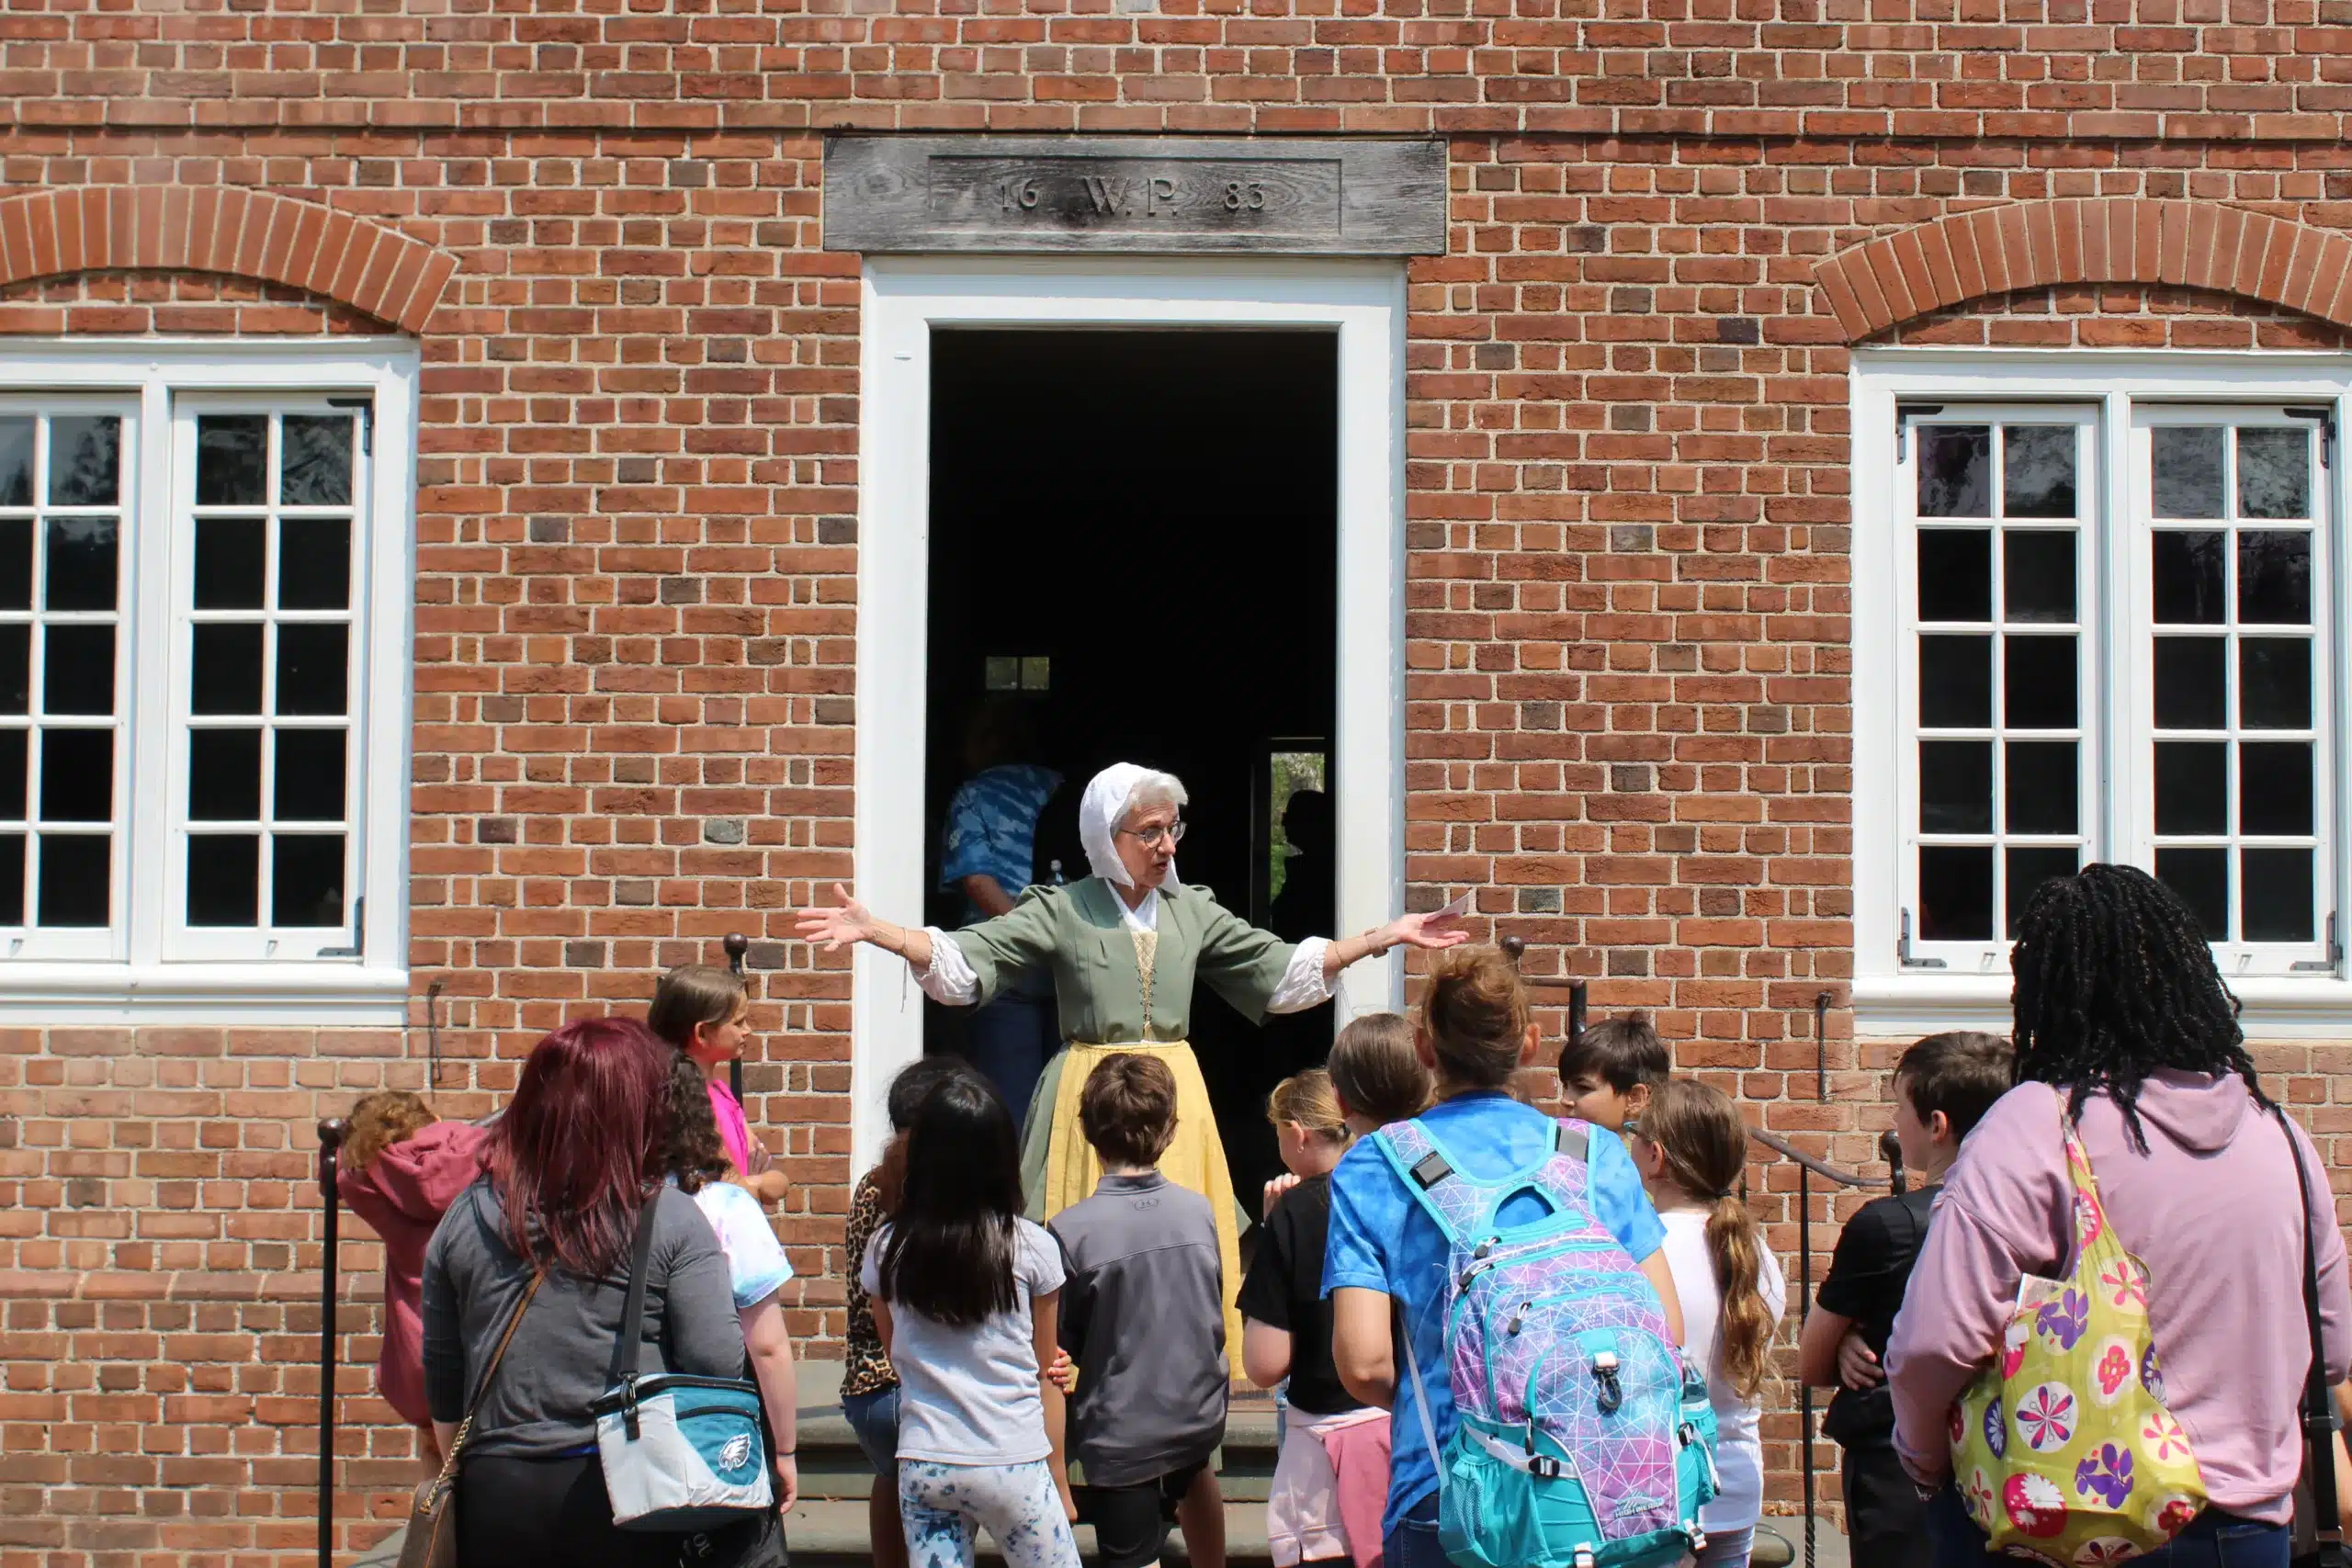 A woman dressed in colonial attire stands outside the manor house entrance with her arms open to welcome a group of students to the Manor House.